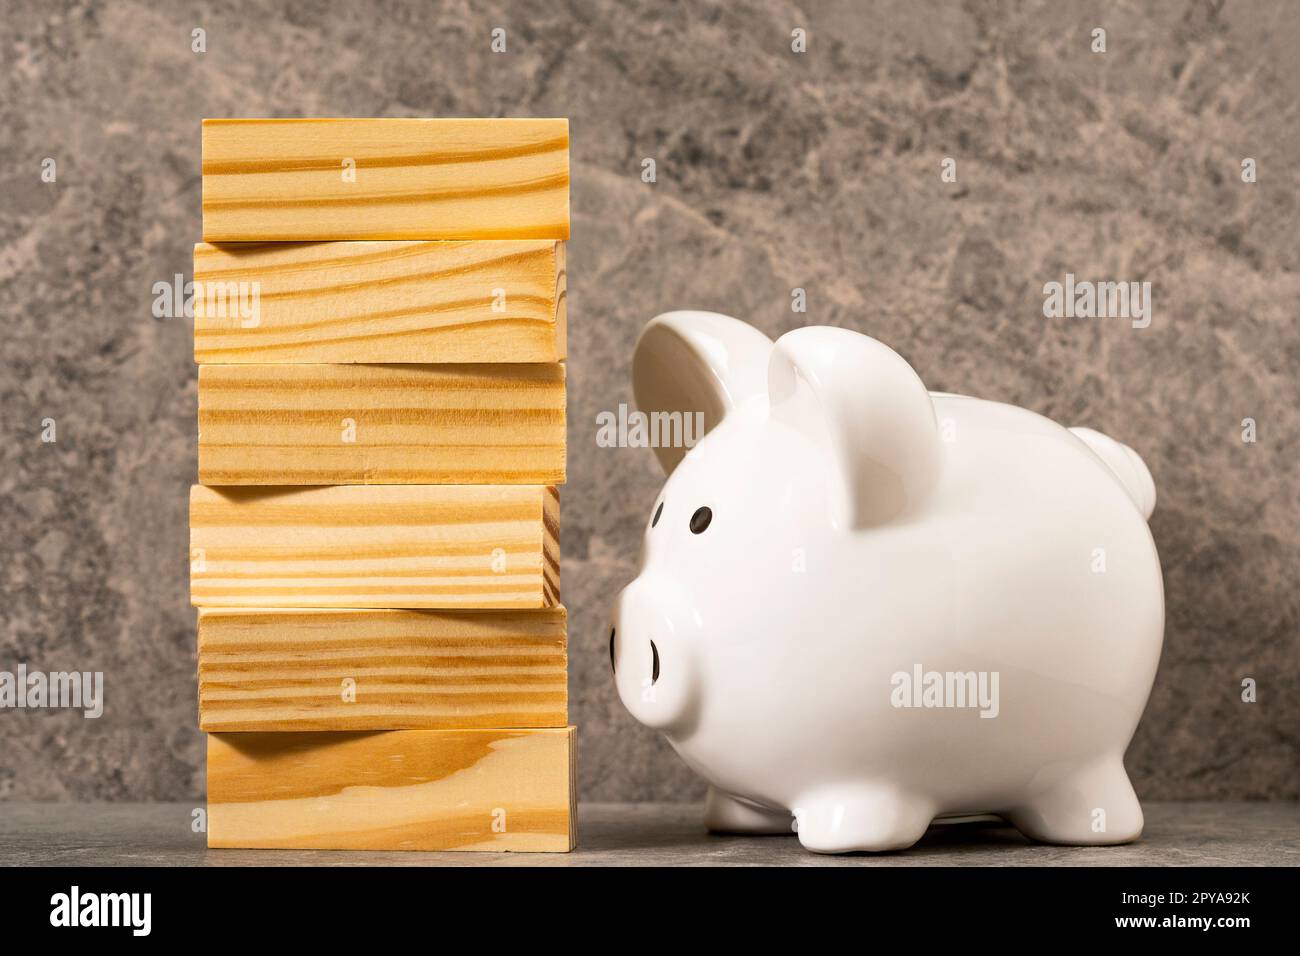 Piggy bank and stack from wooden blocks Stock Photo